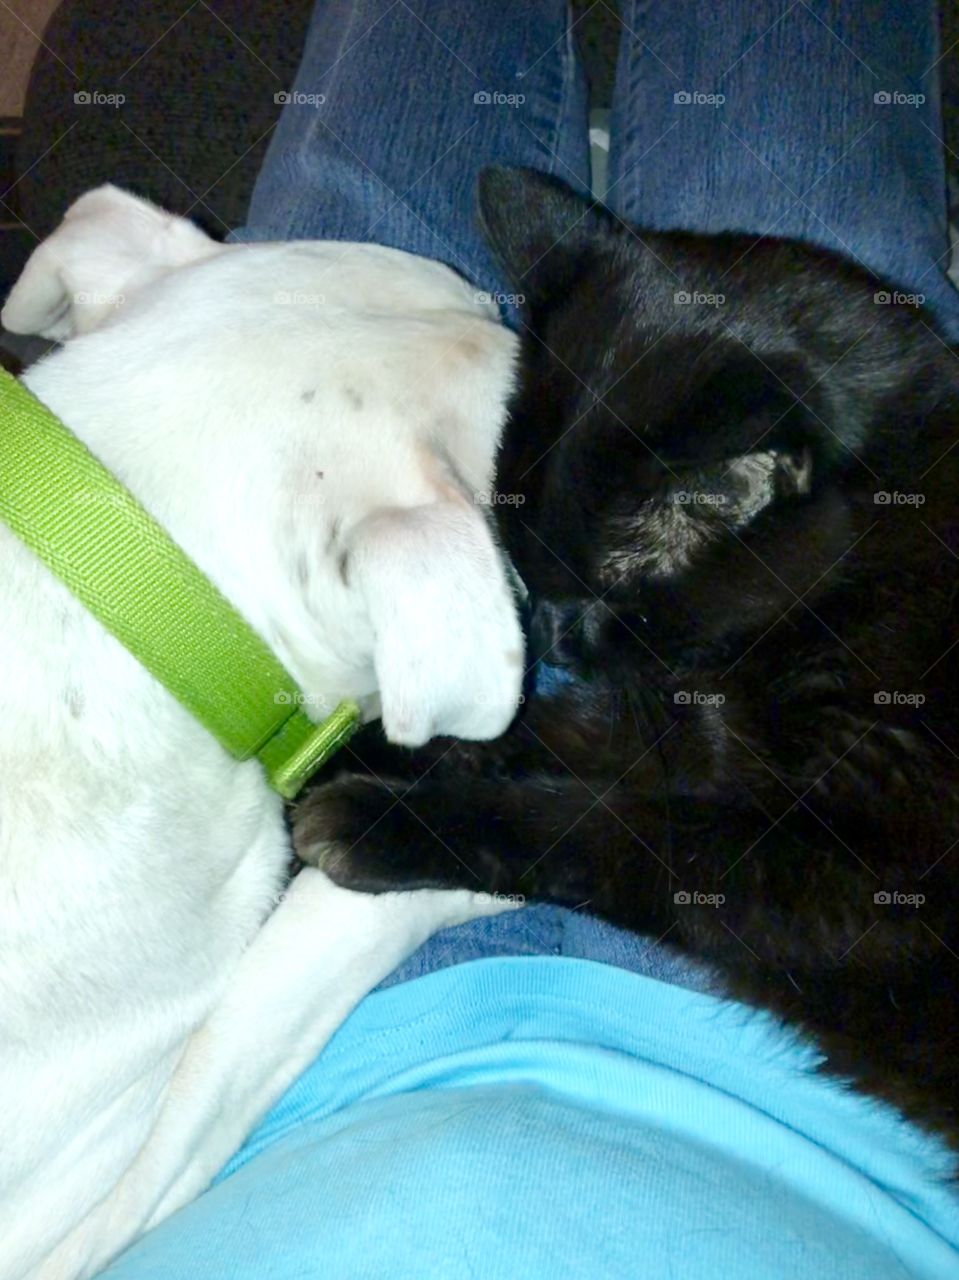 Yin and Yang- Jade Dragon and Salem, white sister, black brother, nap warmly and comfortably together on my lap.